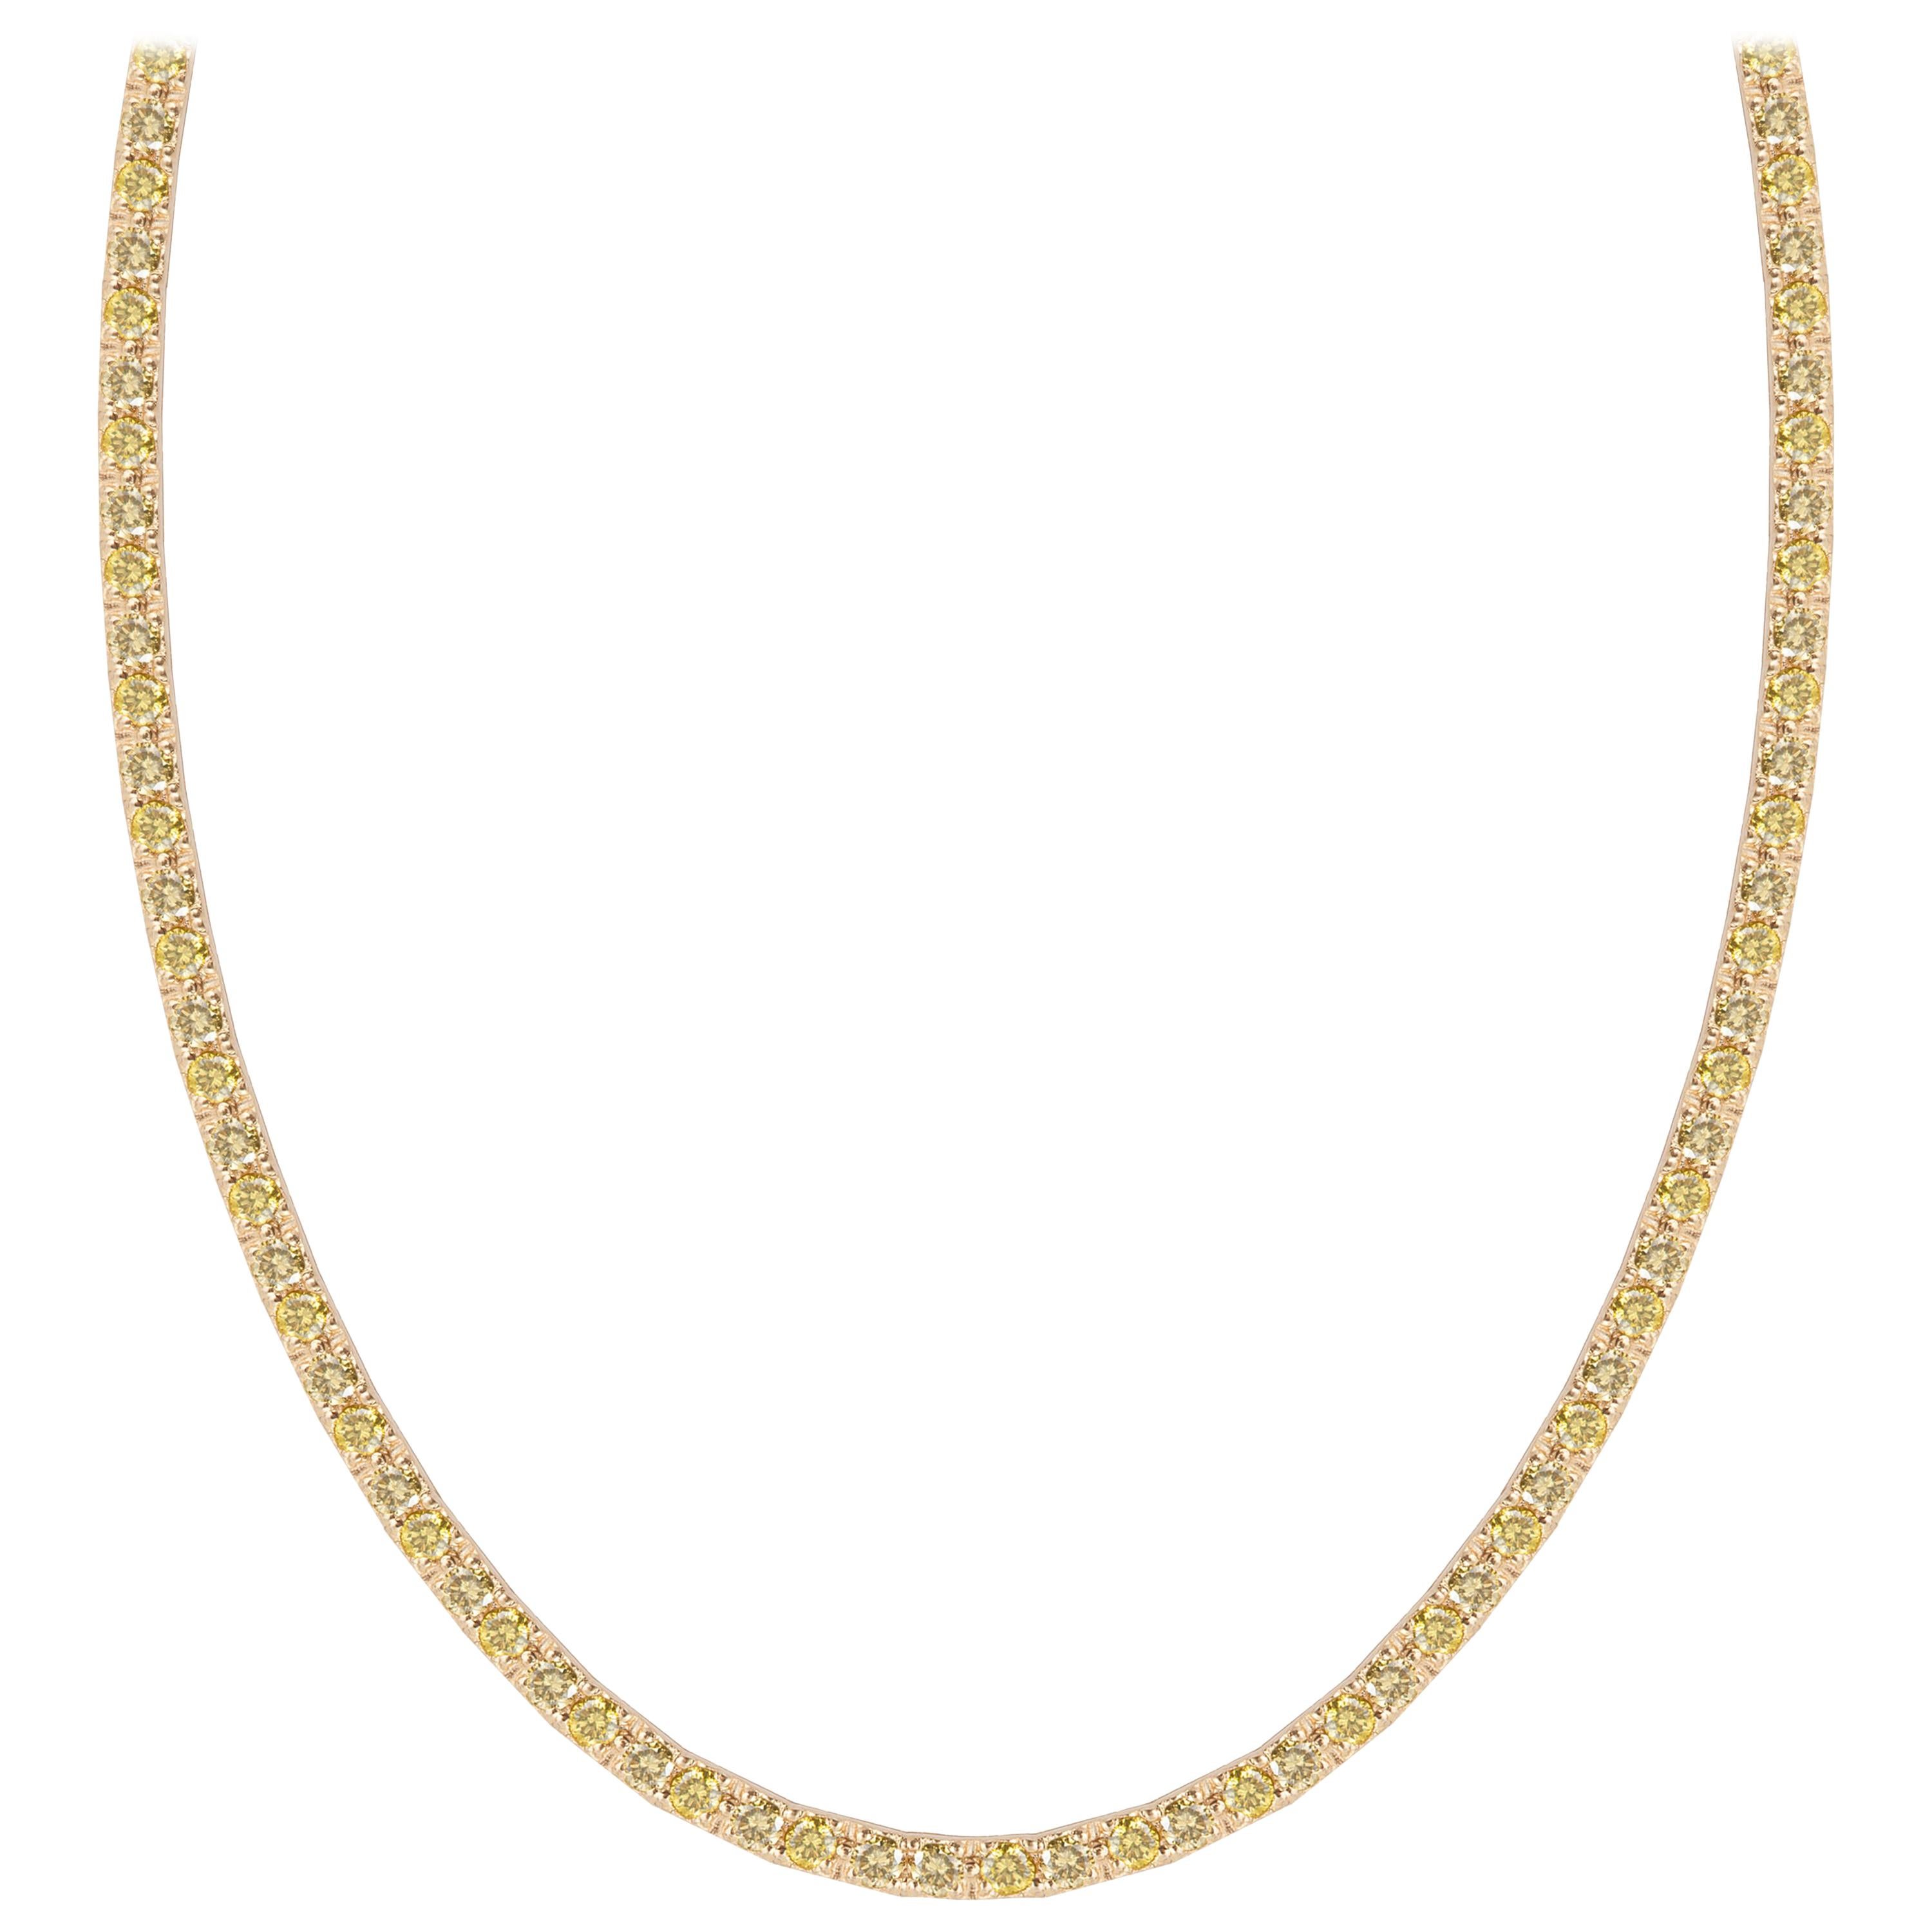 1.00ct Marquise Diamond (x 7) Necklace in 18K Yellow Gold, valued at ...